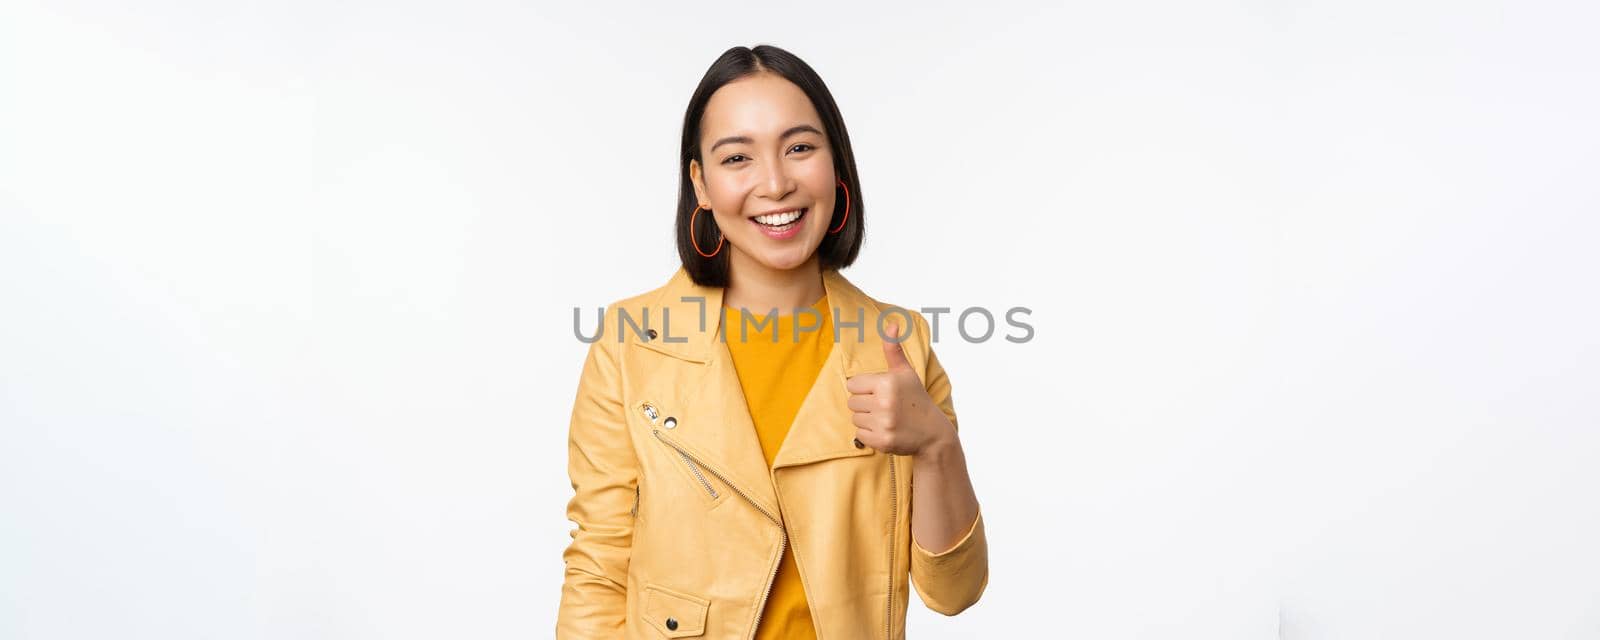 Beautiful korean girl smiling, showing thumbs up, like gesture, recommending store or company, standing satisfied against white background.